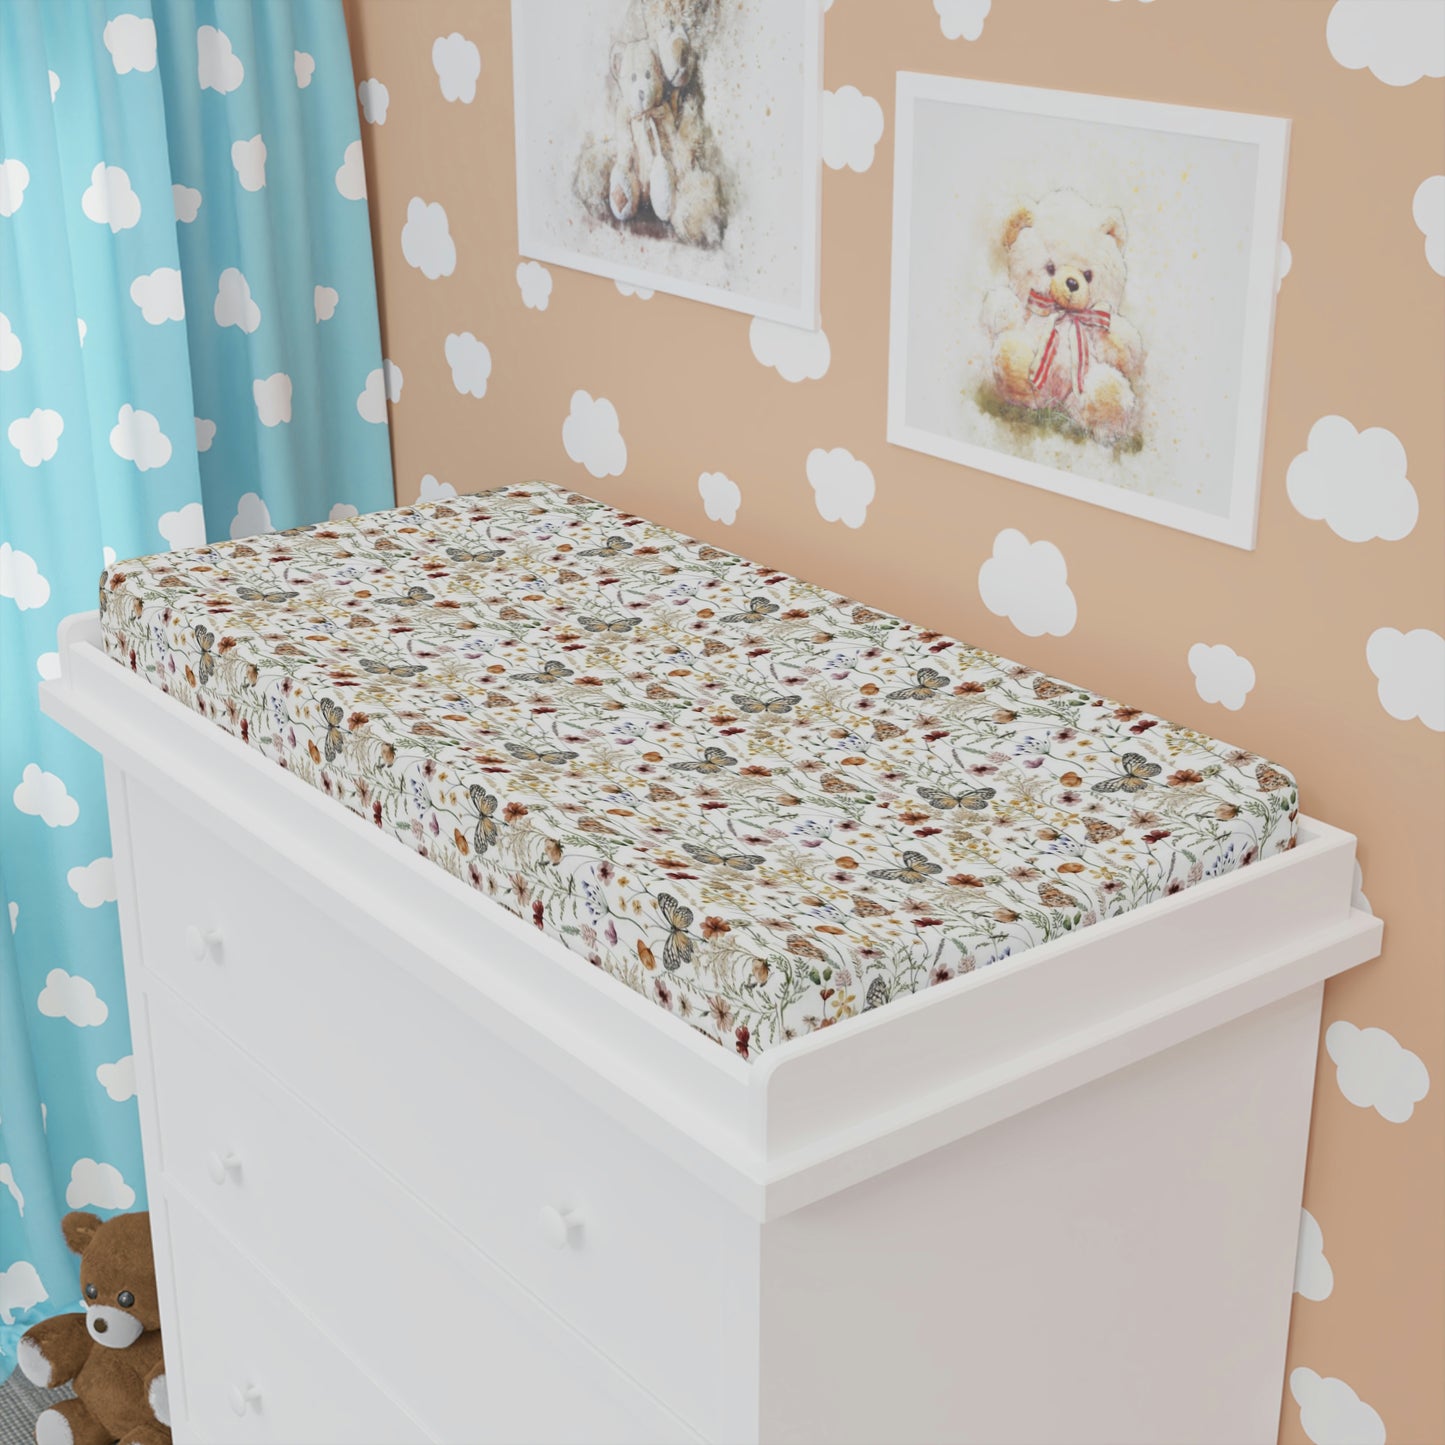 Butterfly floral Changing Pad Cover, Wildflower nursery bedding - Butterfly garden